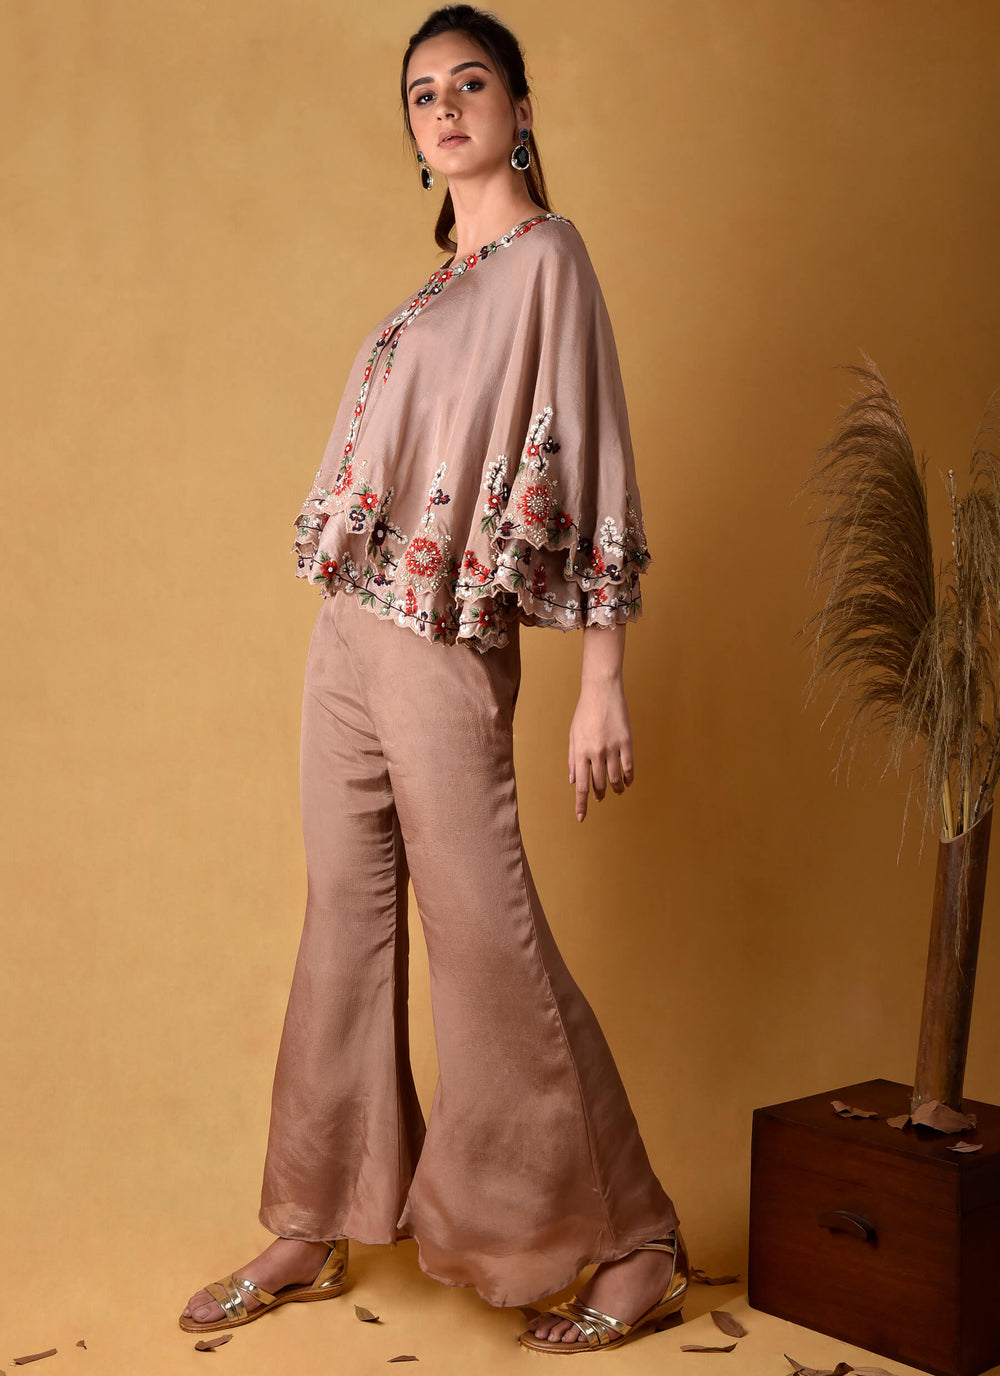 Poncho Top With Bell-Bottom Pants